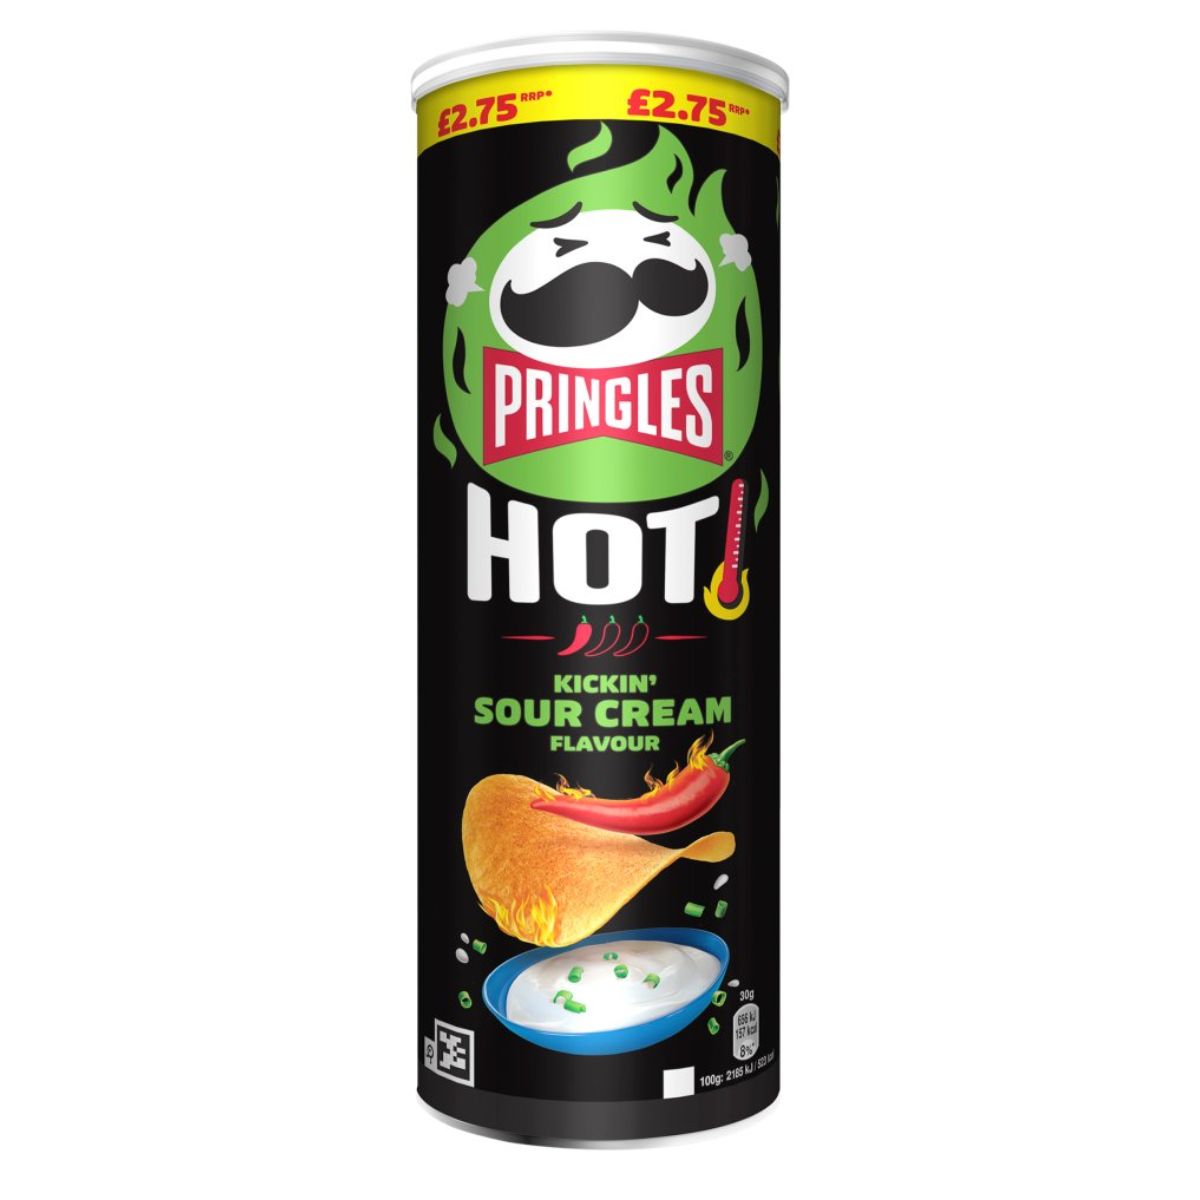 A can of Pringles - Hot Kickin Sour Cream Flavour - 160g with a price tag.